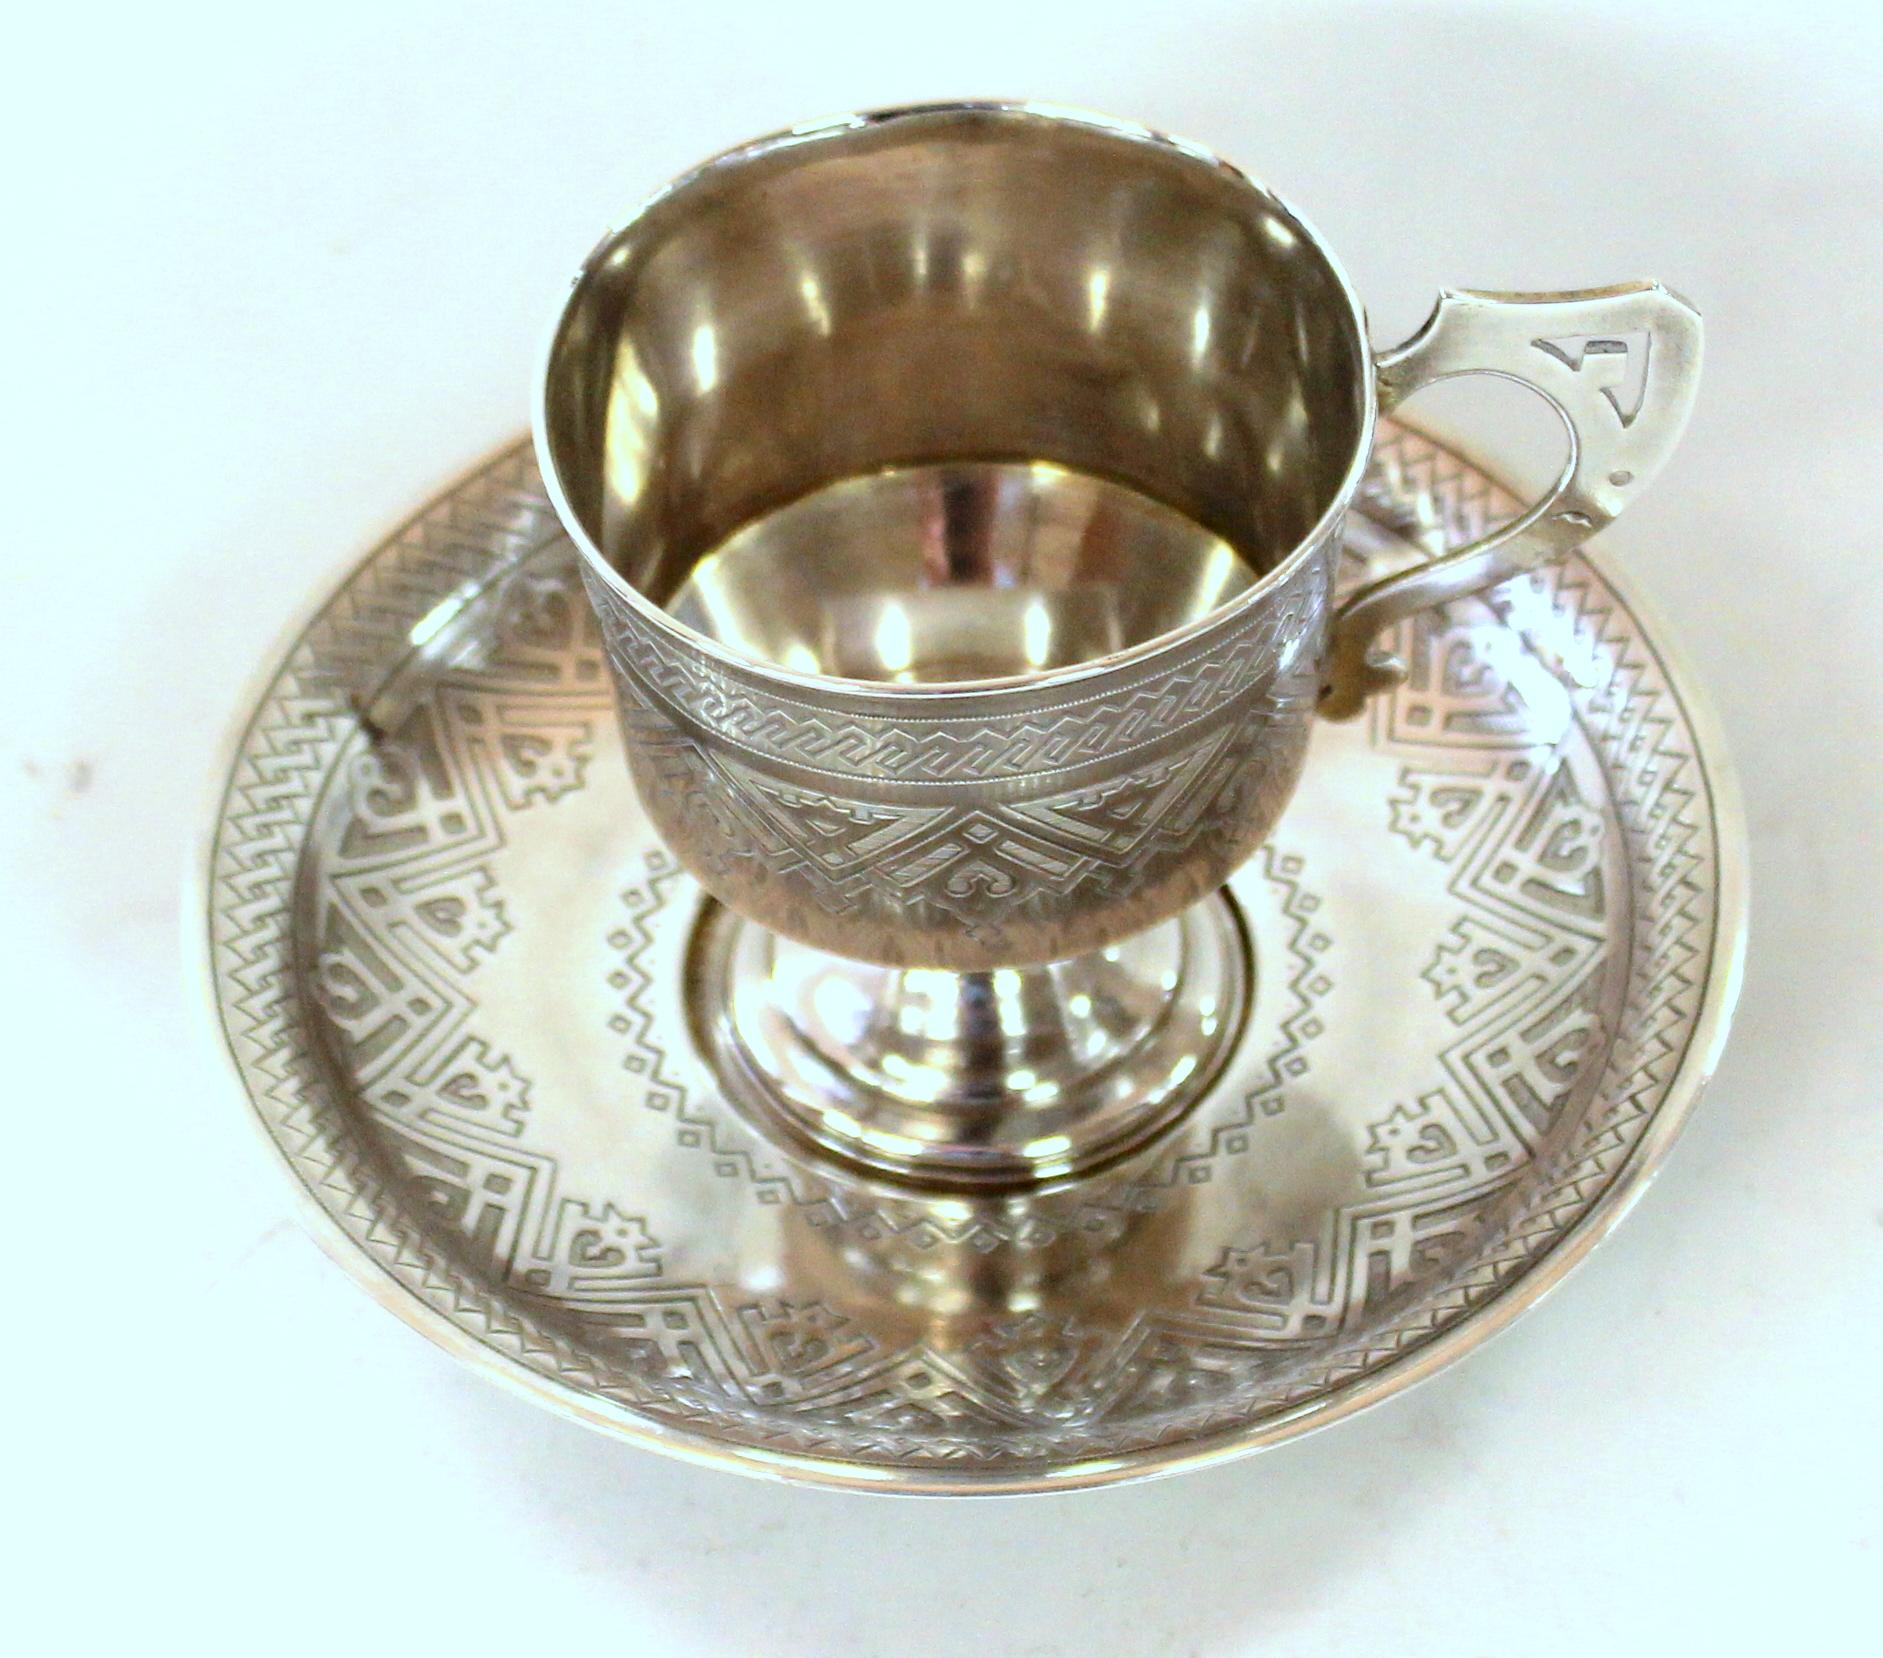 Antique Imperial Russian Silver Hand Engraved Cup and Saucer, Aleksandr Fuld For Sale 10